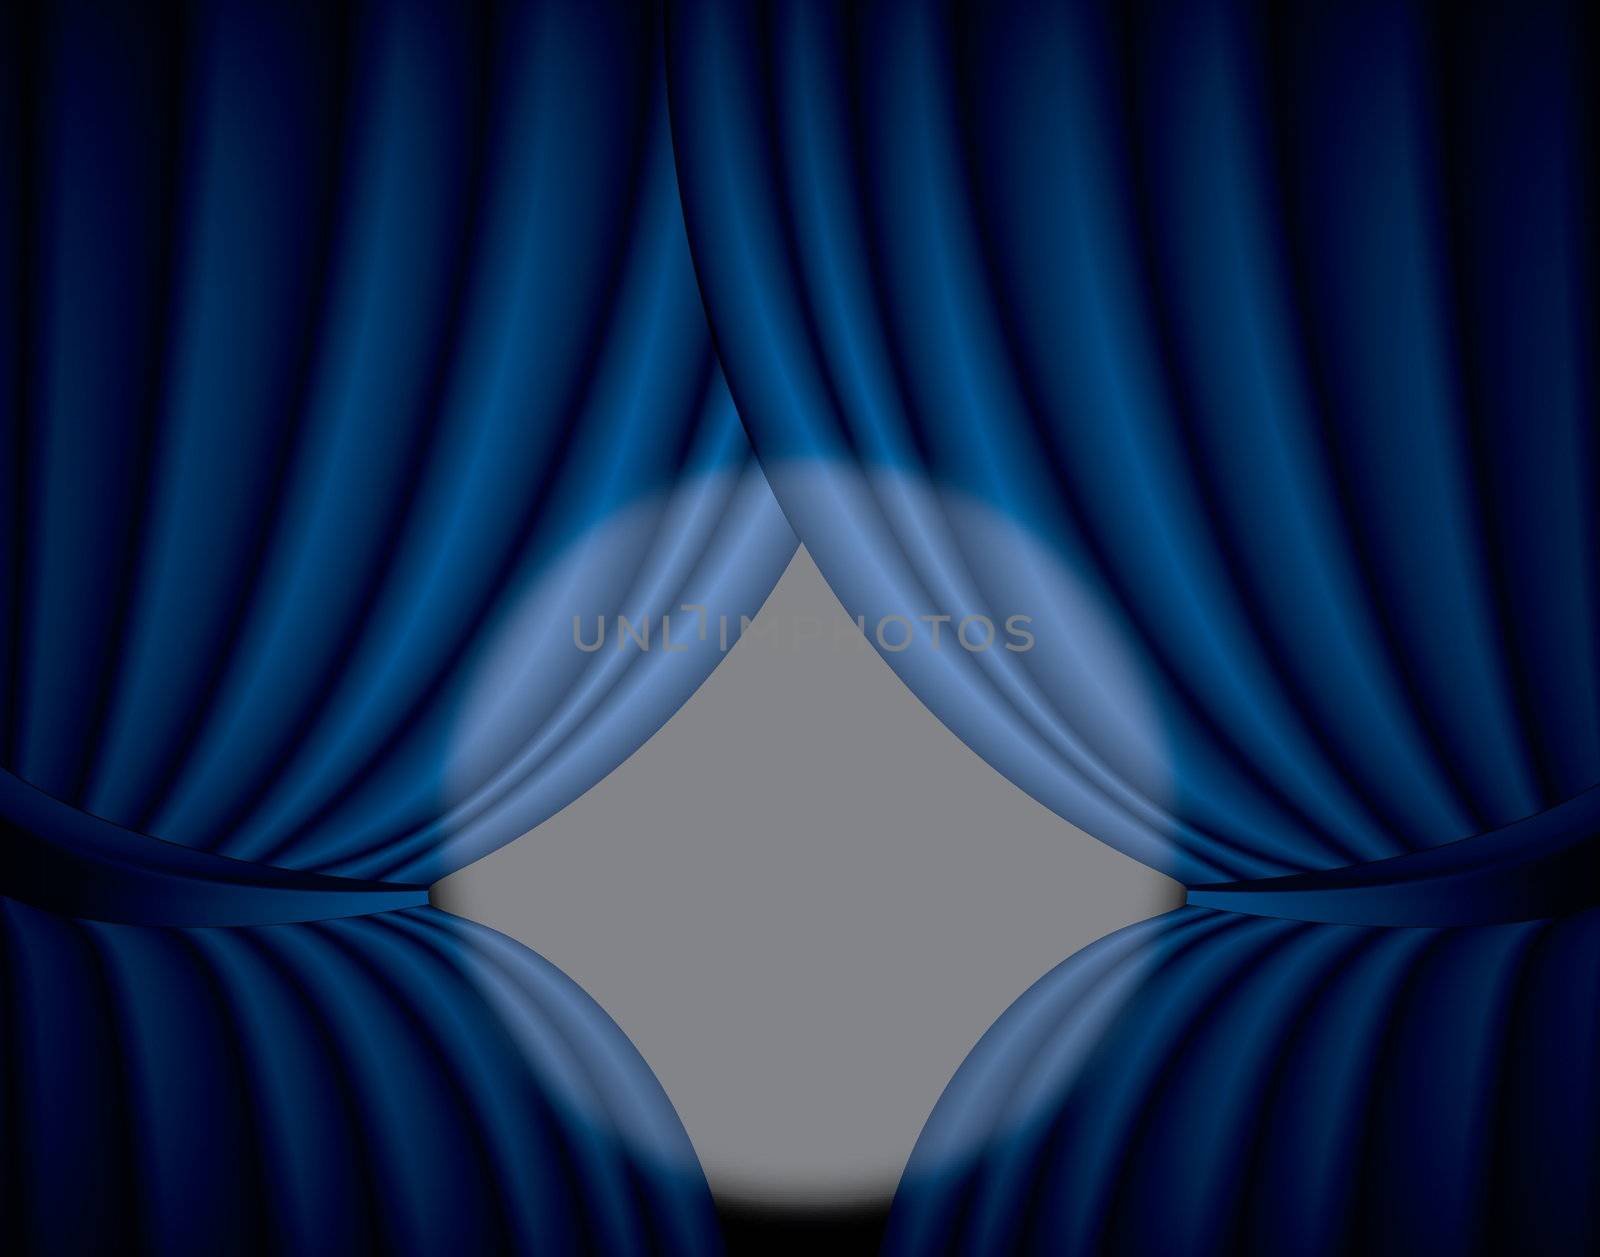 Blue curtain background with spotlight in the center, illustration